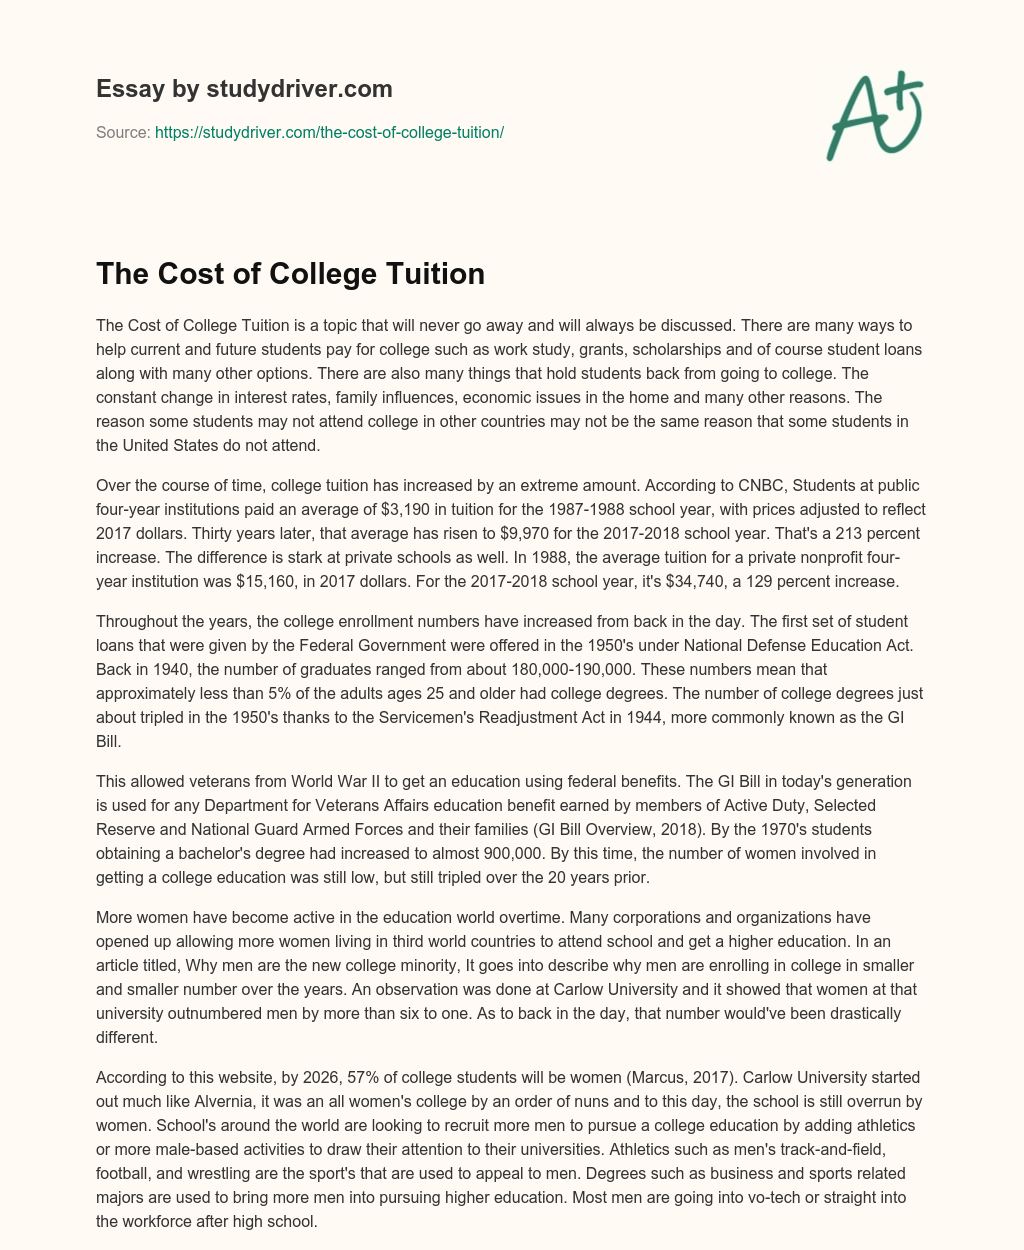 The Cost of College Tuition essay